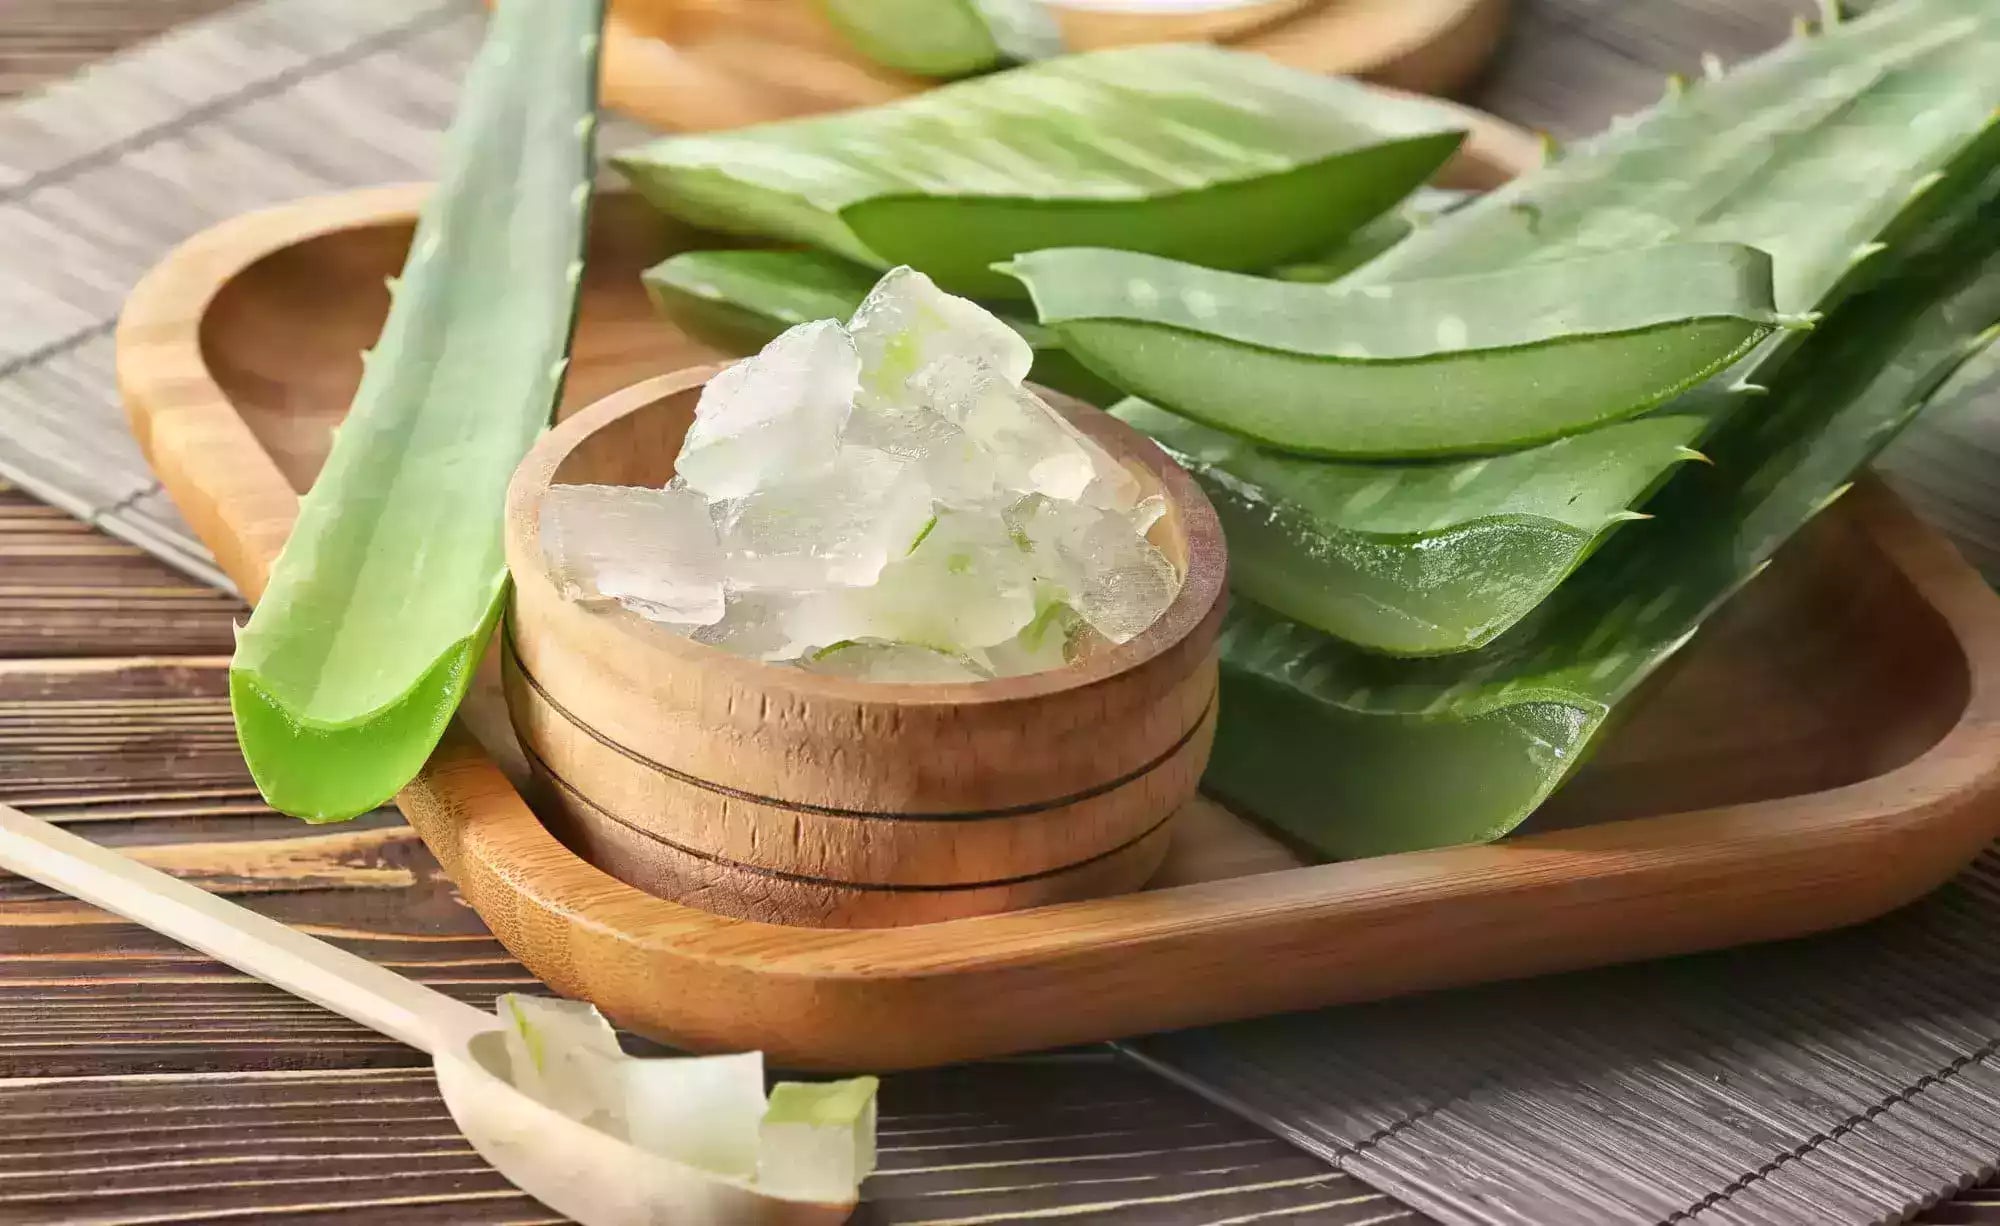 Baily Cosmetics Aloe Vera Gel is natural, vegan, and made with lots of love. Enchant your skin with the goddess of medicinal plants and experience a new kind of natural & vegan skin care.